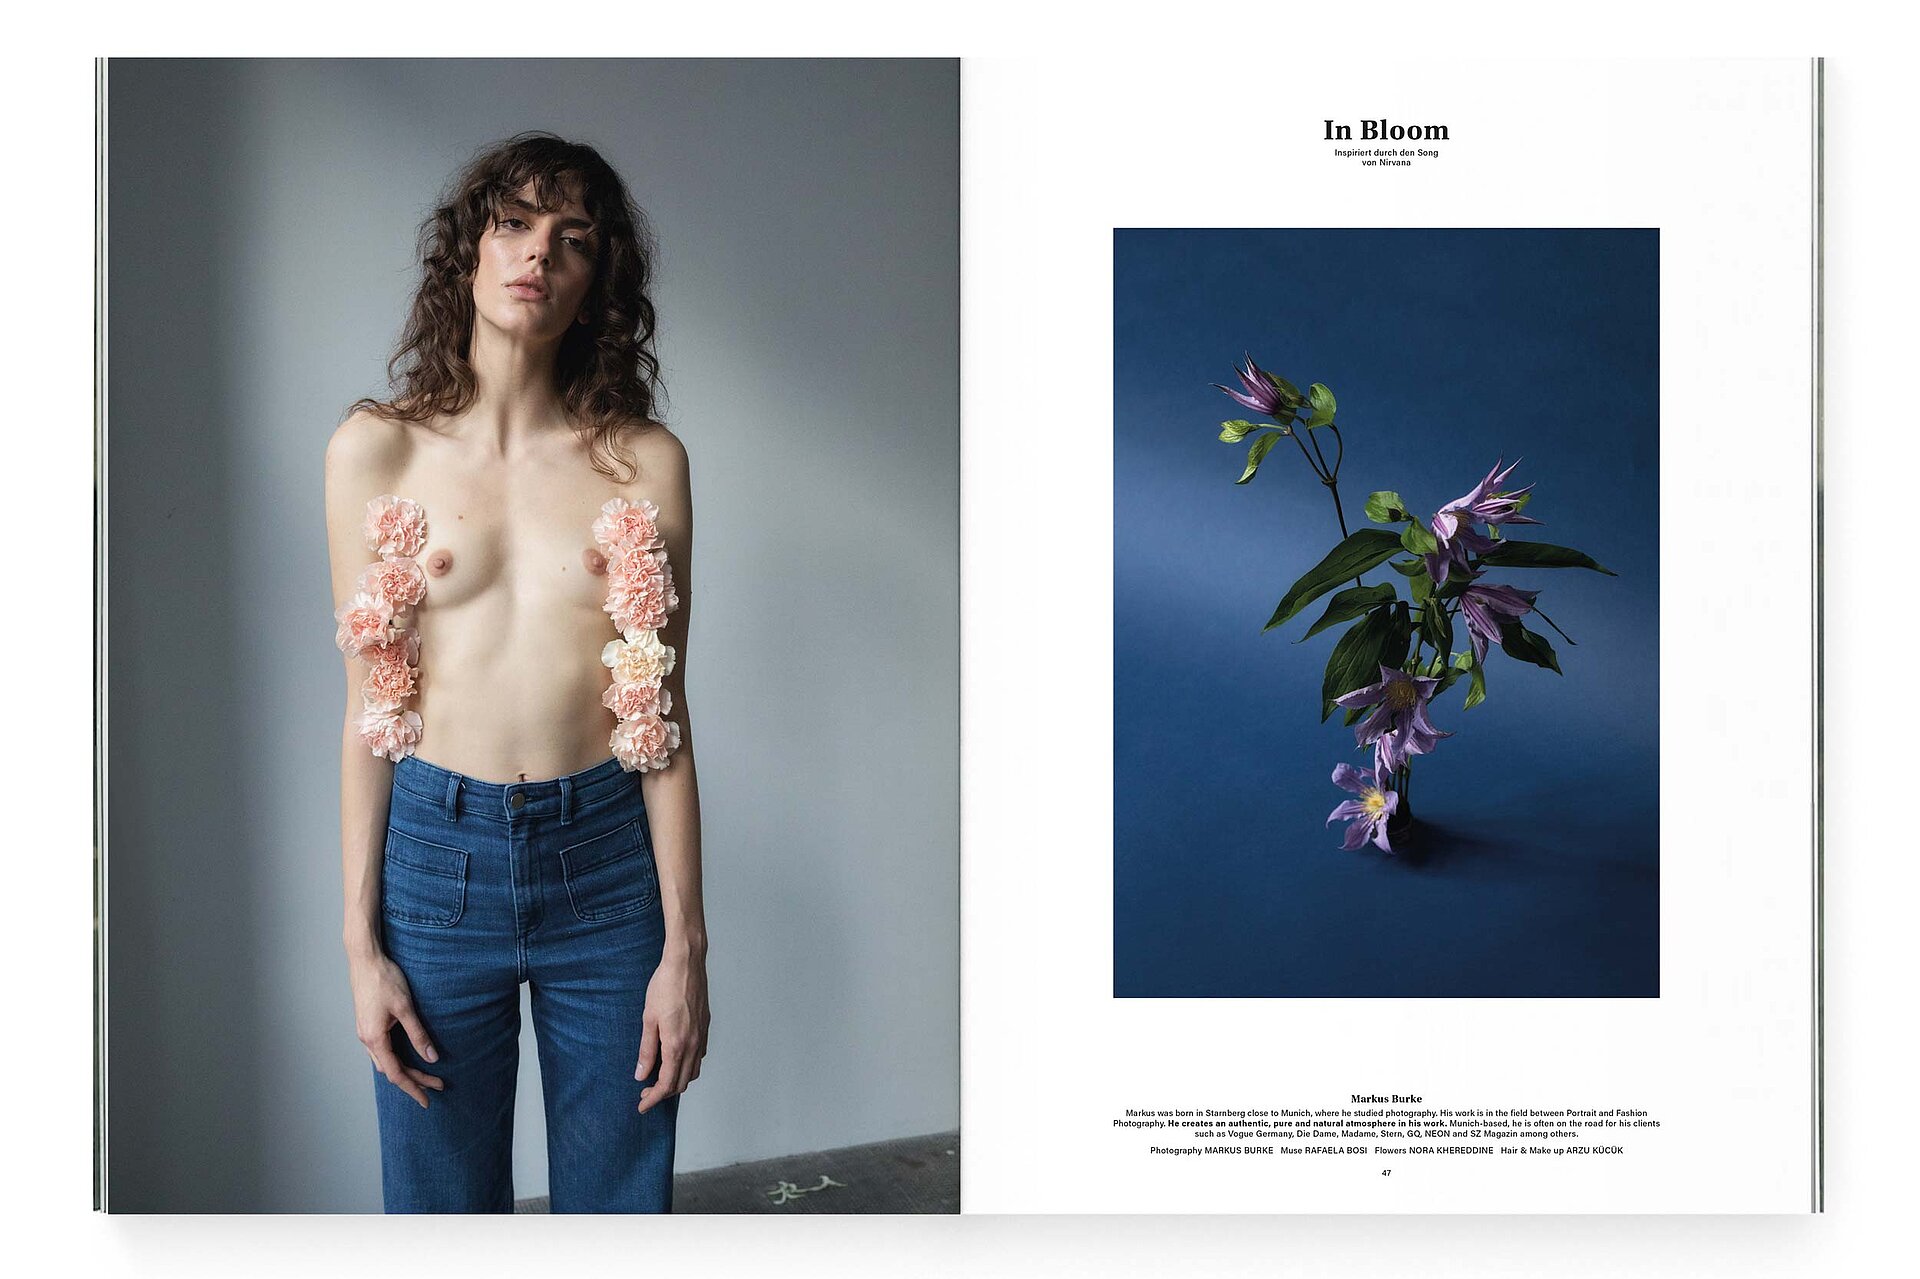 mjr magazine pages with topless model flowers design bern